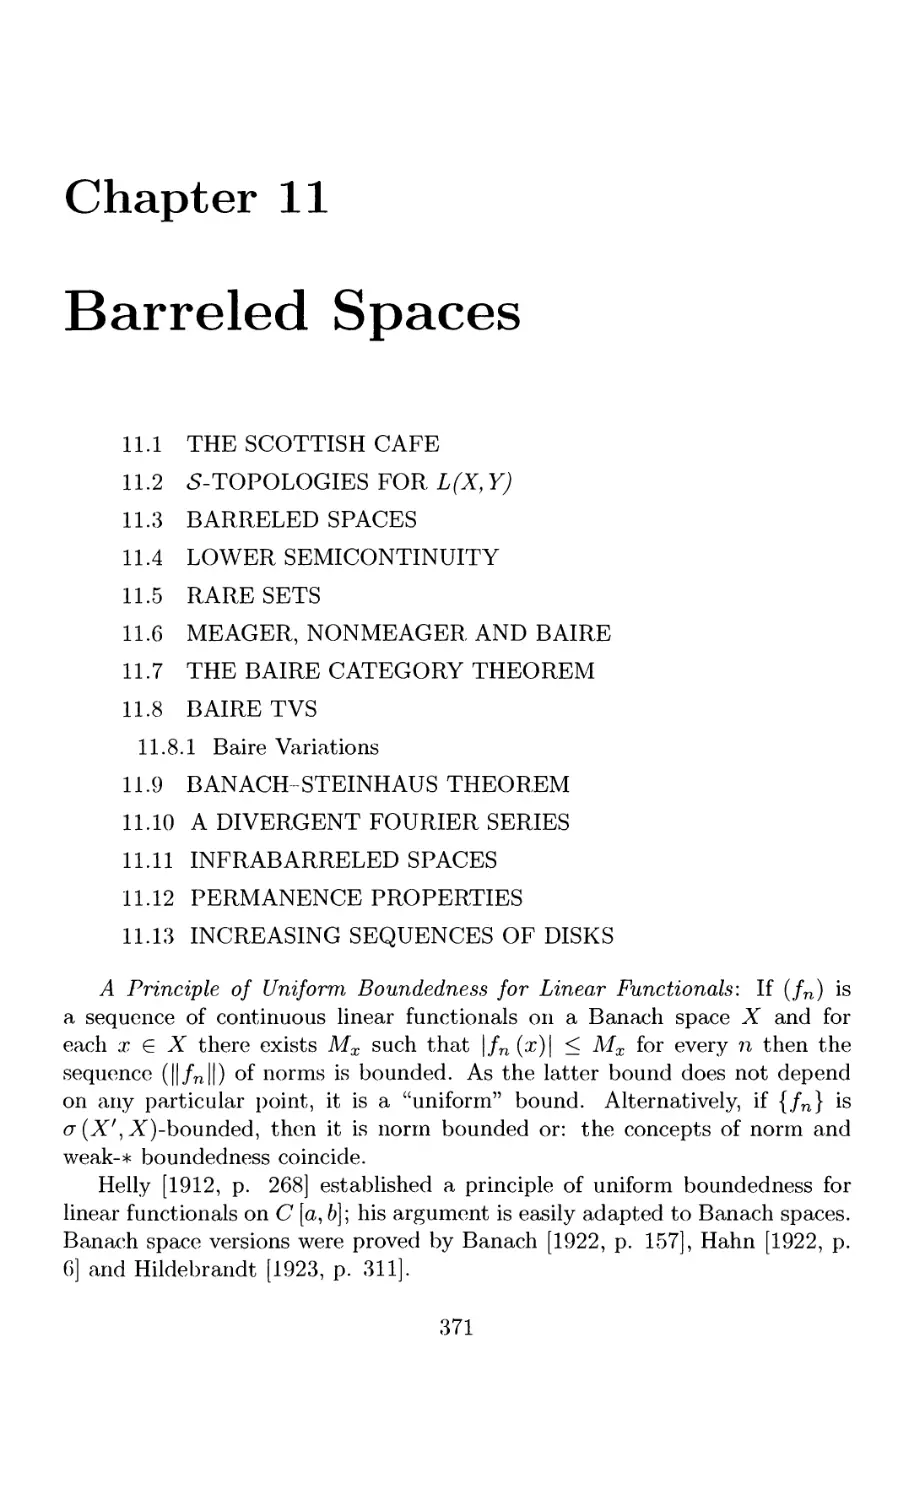 11 Barreled Spaces